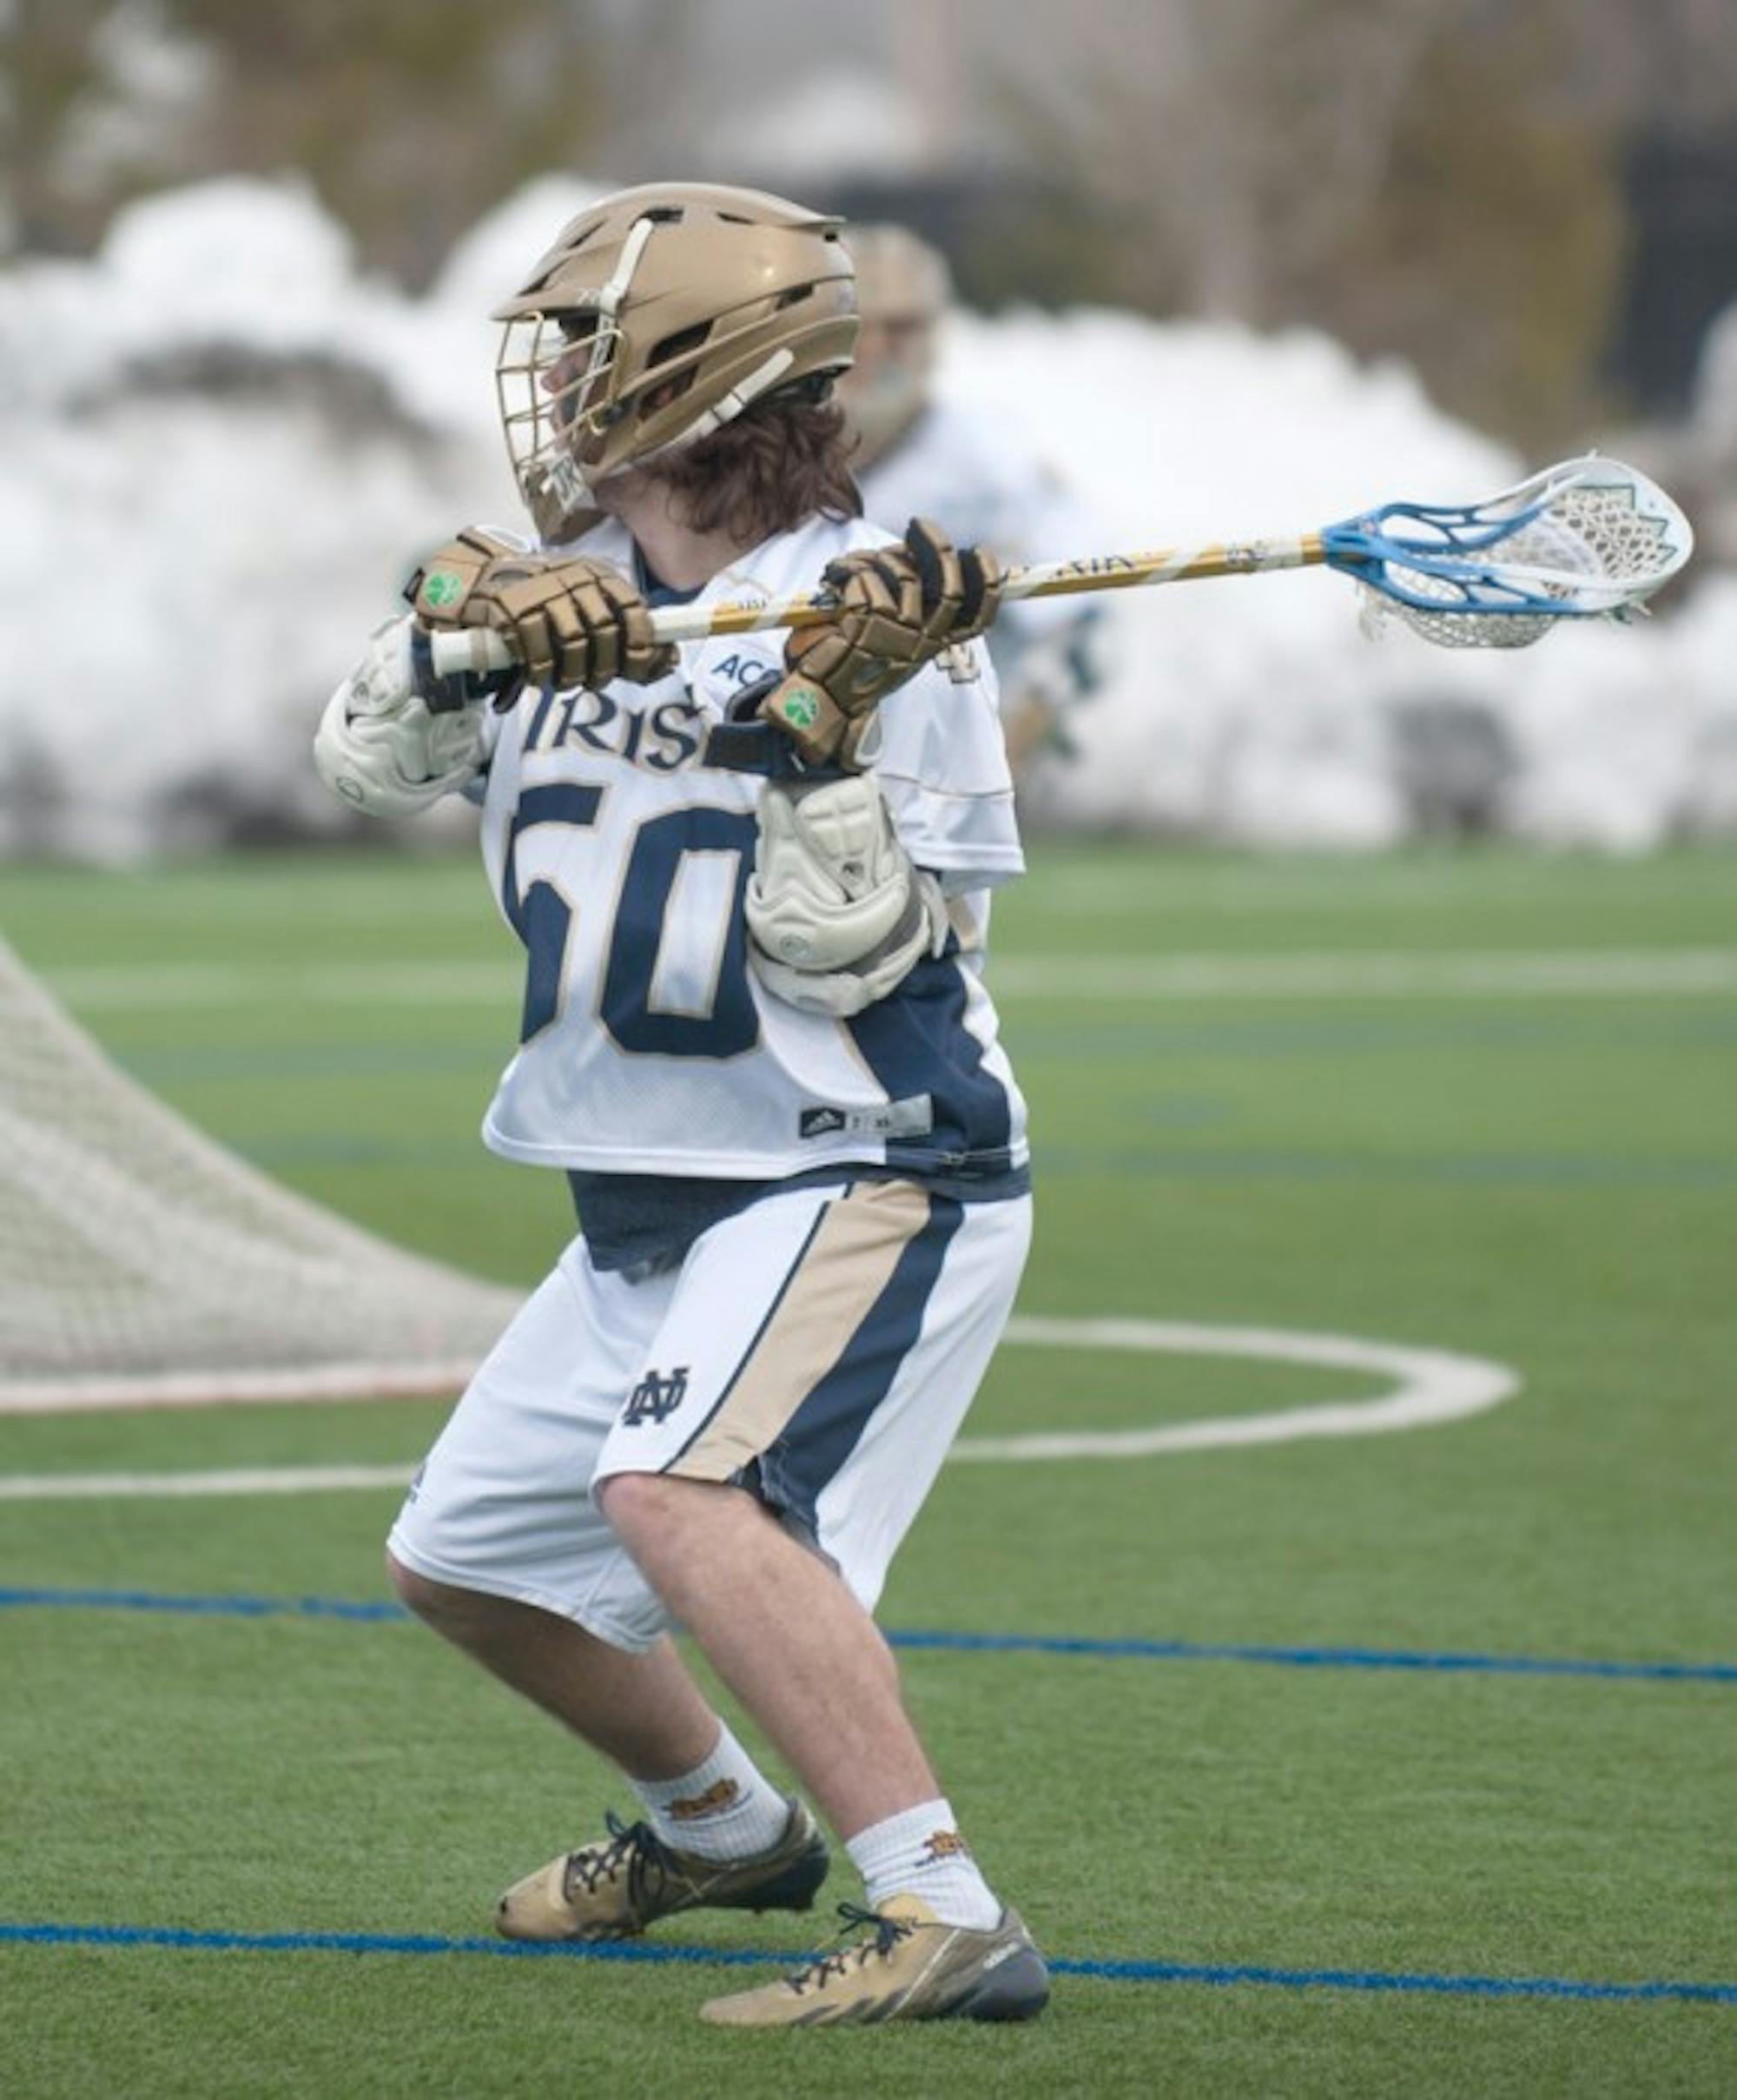 Sophomore attackman Matt Kavanagh looks to shoot in Notre Dame's 8-7 loss to Penn State on Feb. 22. Kavanagh tied a team record with seven goals Tuesday against Ohio State.